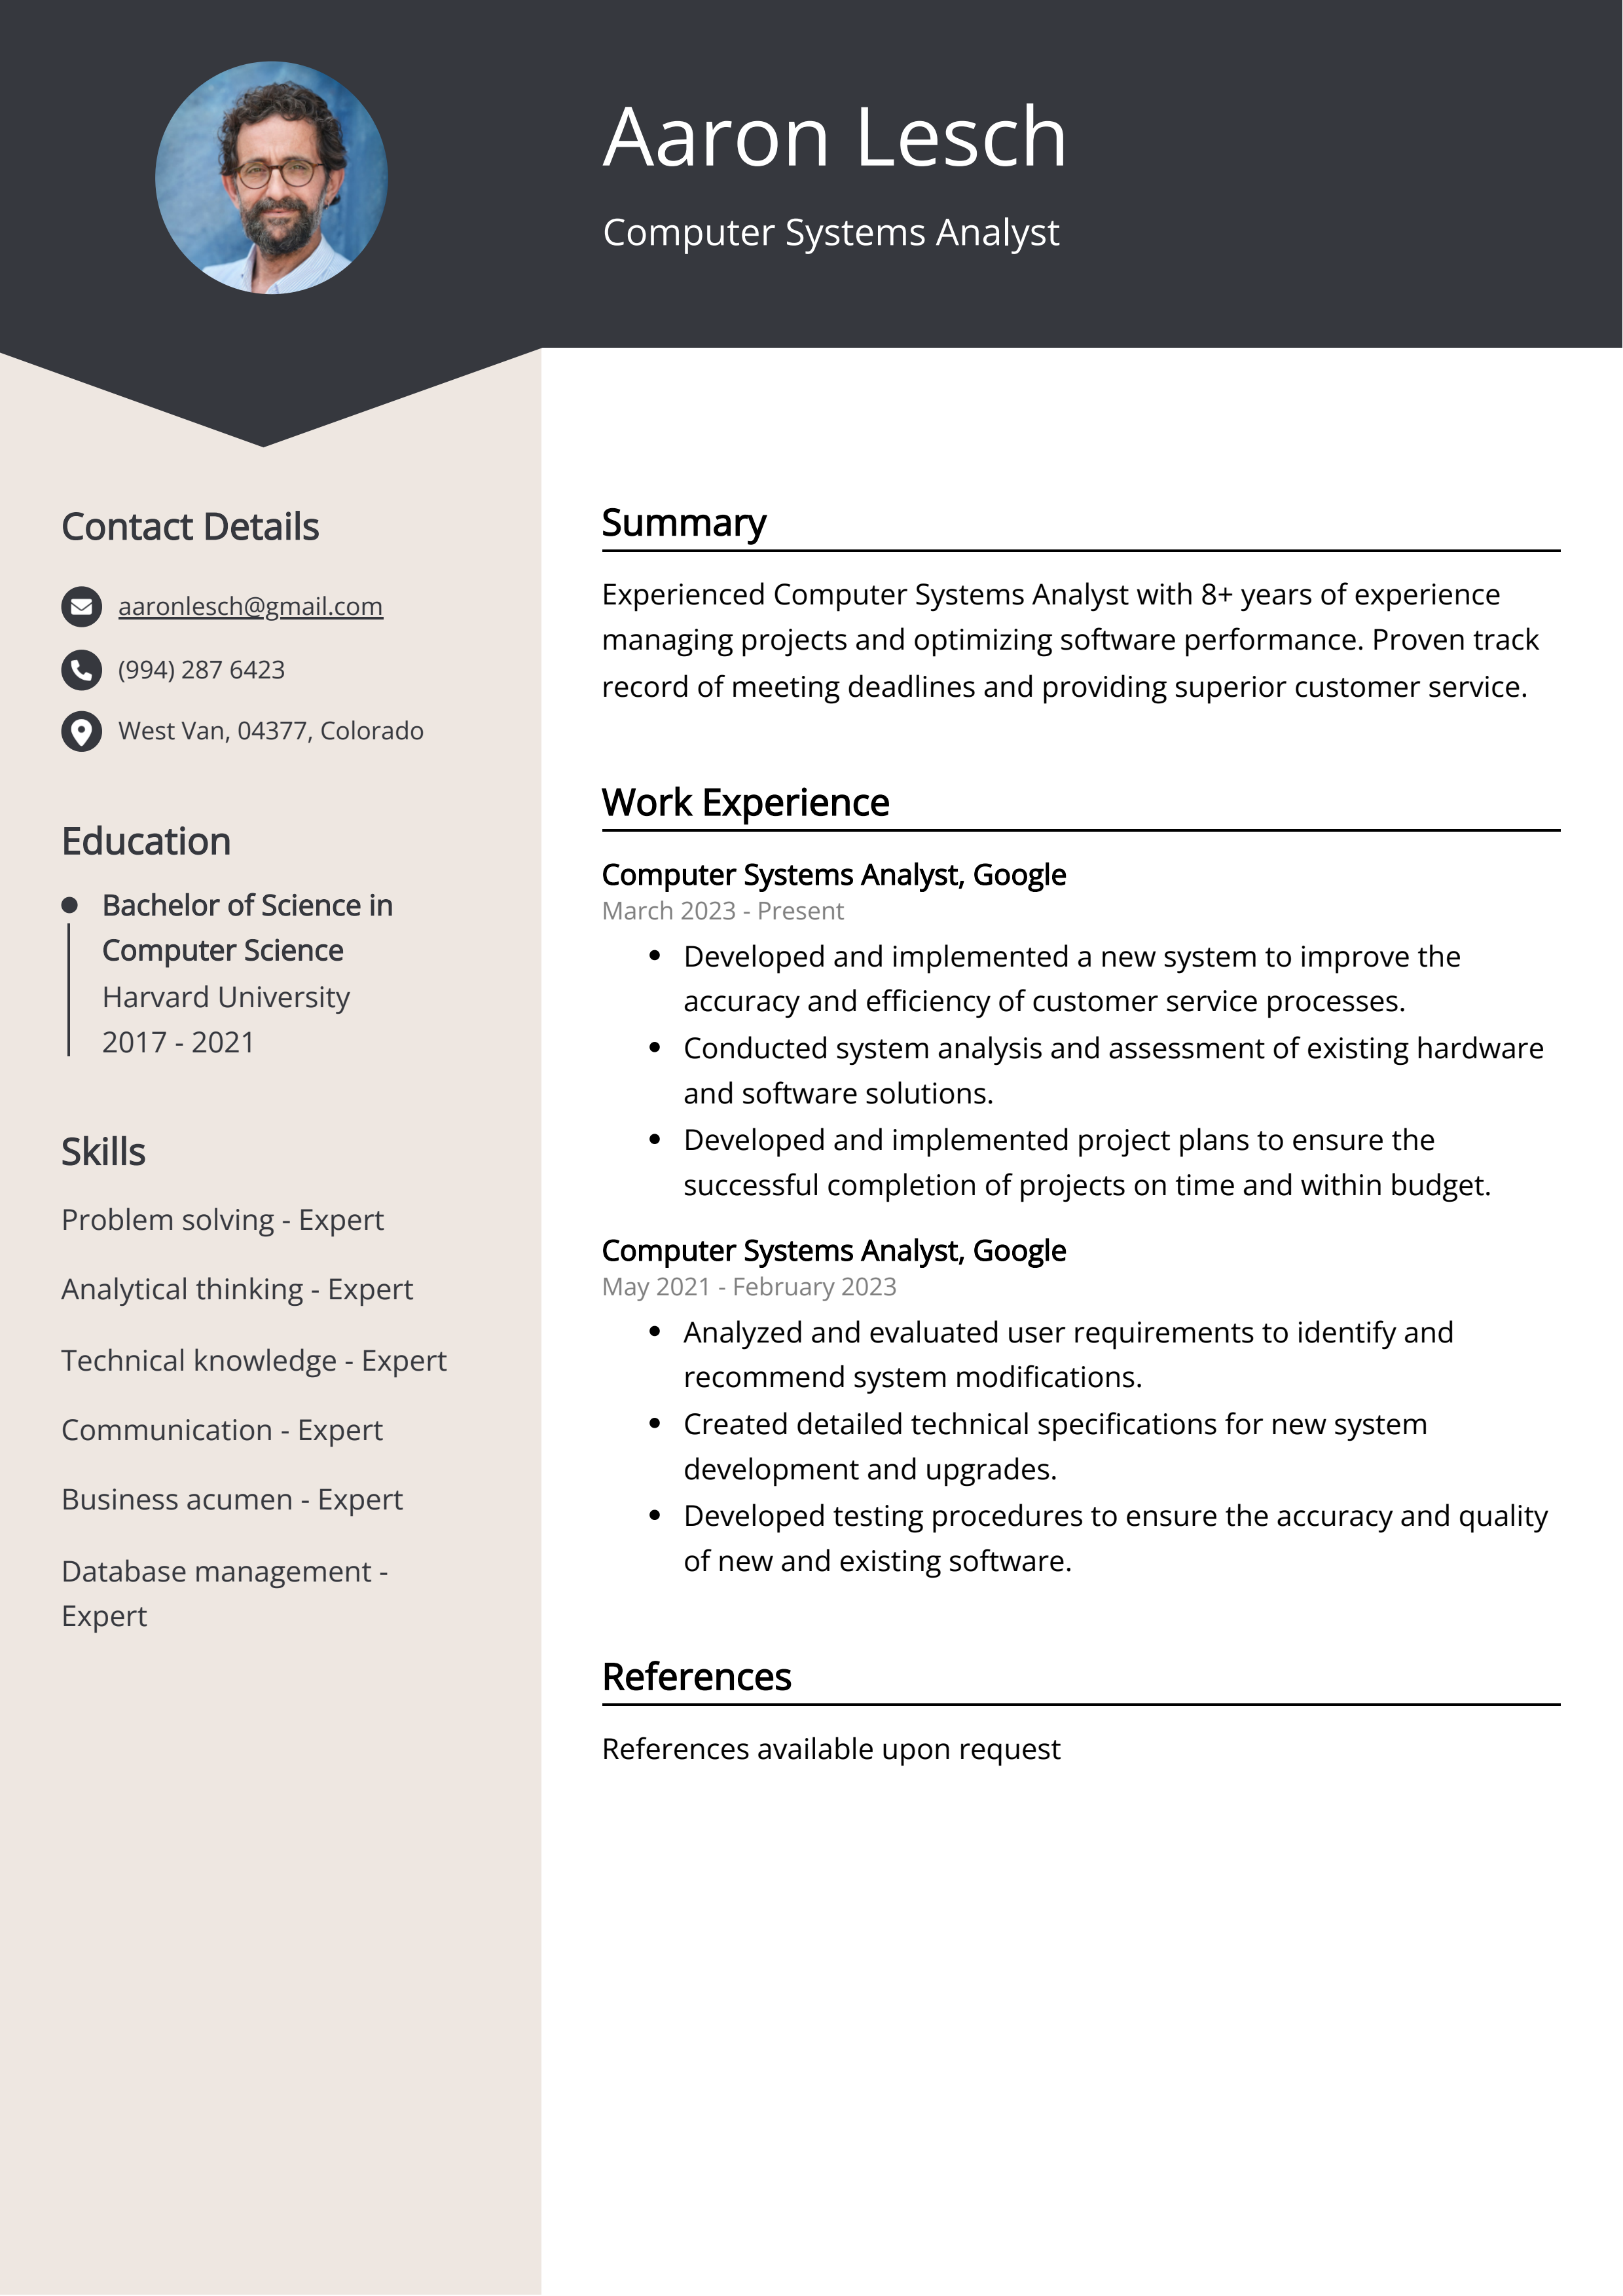 Computer Systems Analyst CV Example